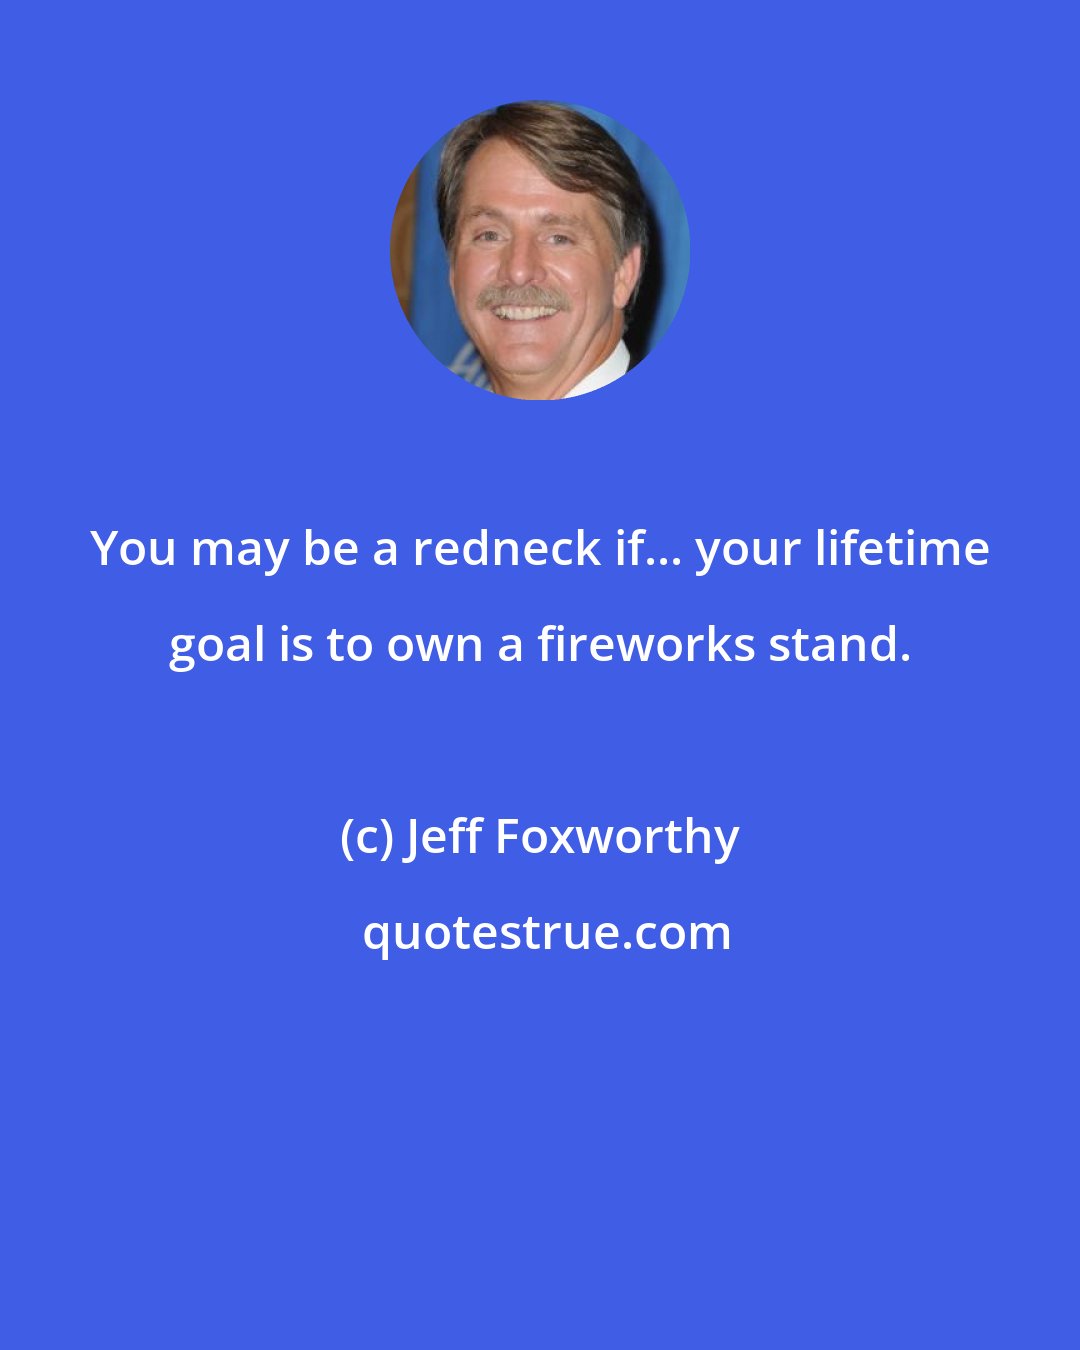 Jeff Foxworthy: You may be a redneck if... your lifetime goal is to own a fireworks stand.